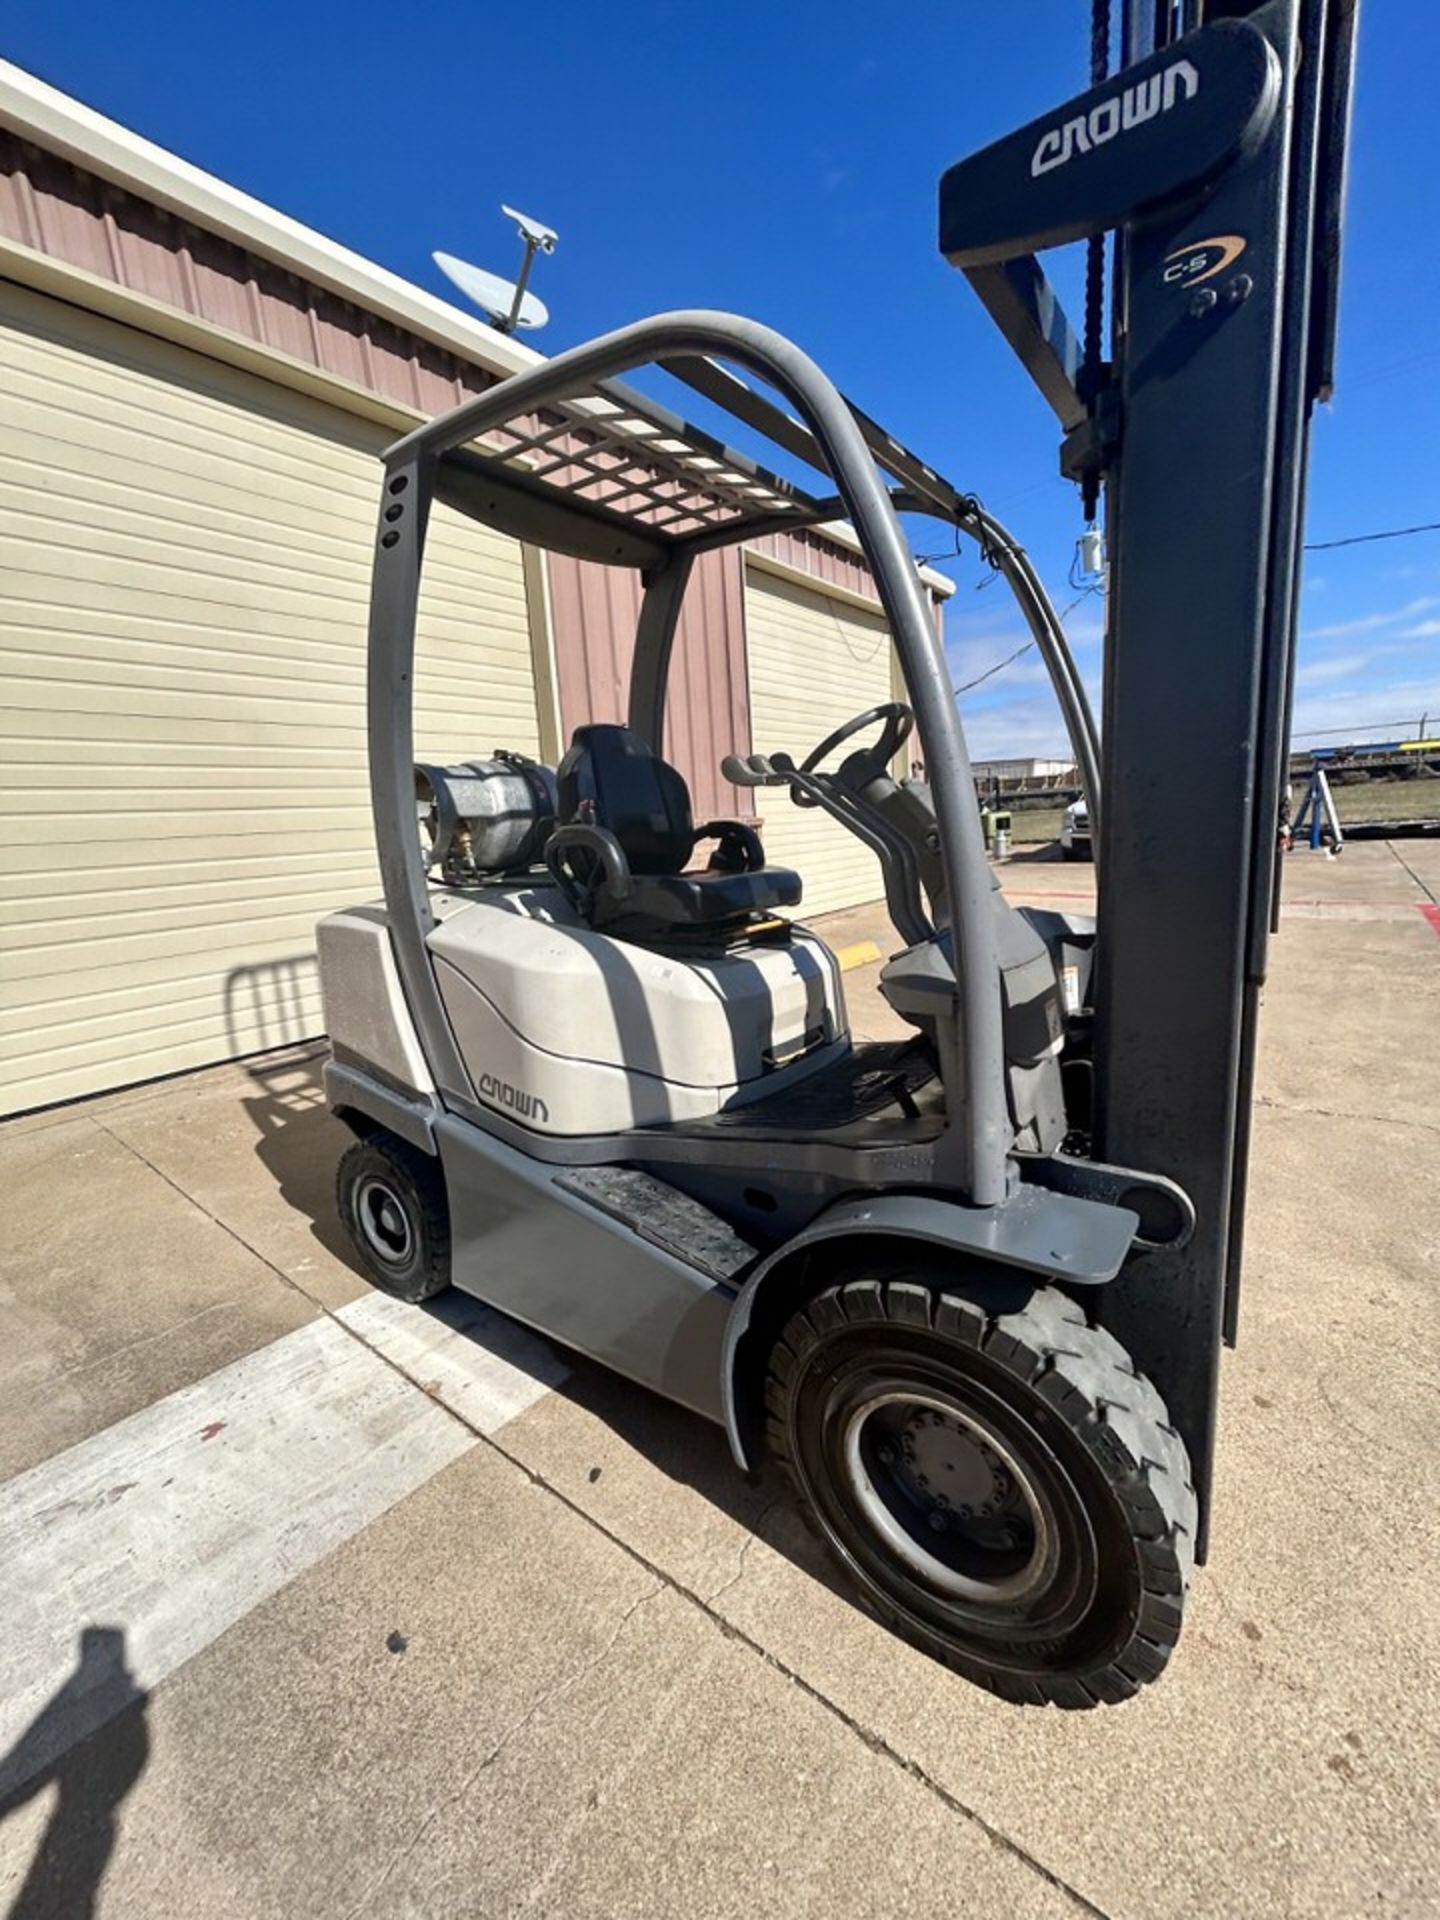 2017 Crown 5,000 lbs Forkift, 3 Stage Mast, Pneumatic Tires, Hours Shown: 576 - Image 3 of 12